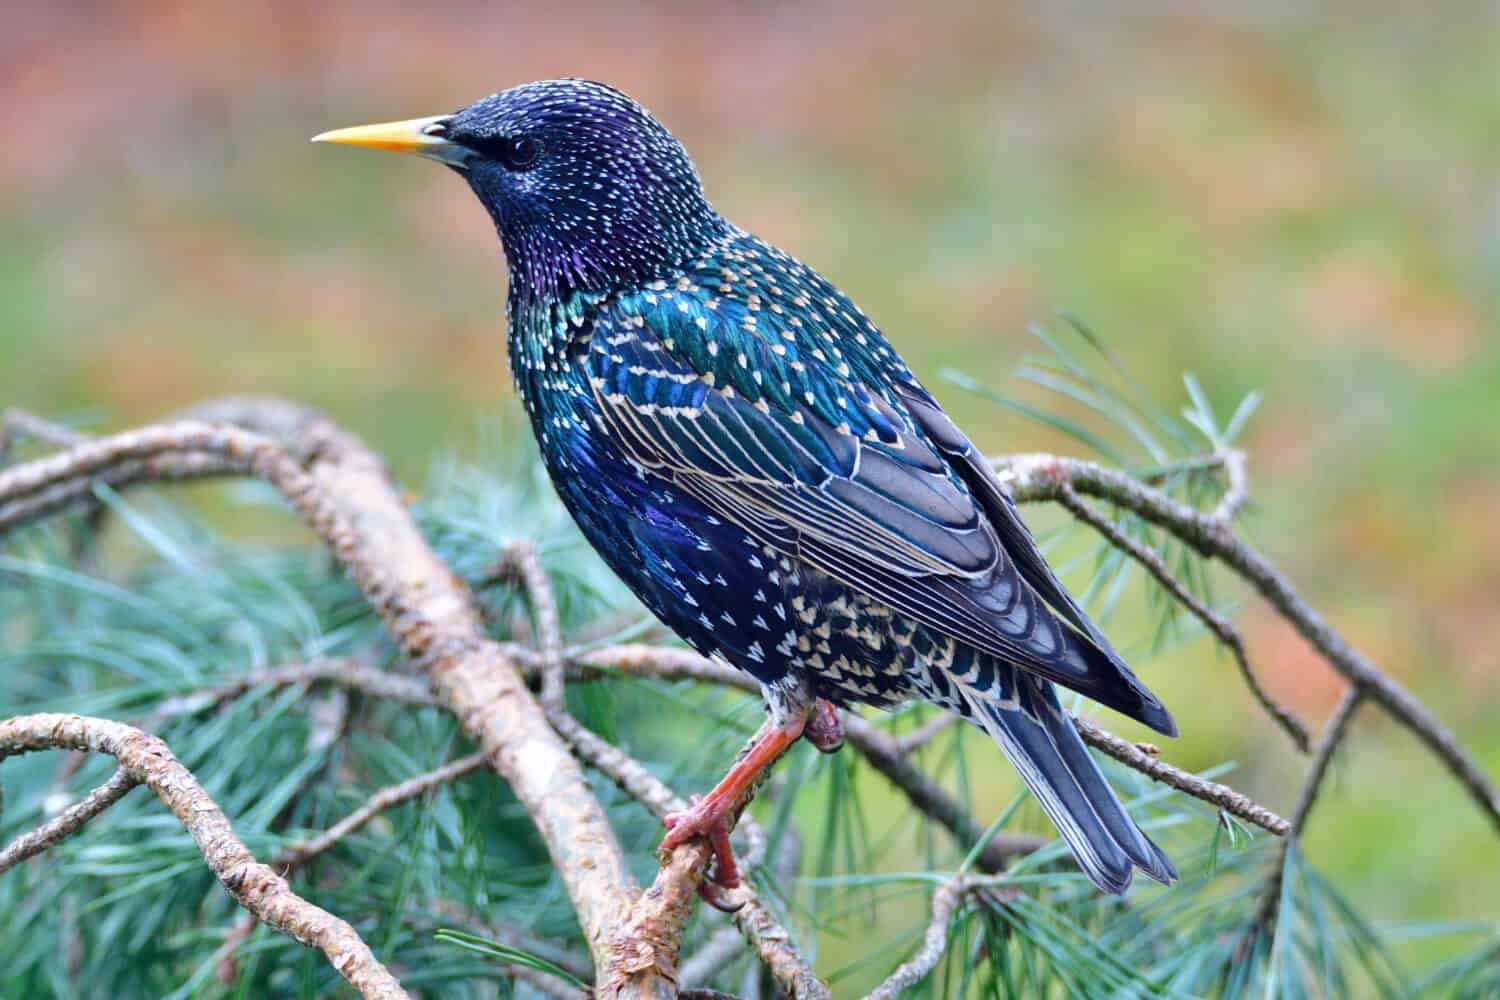 Common starling (Sturnus vulgaris), also known as the European starling,